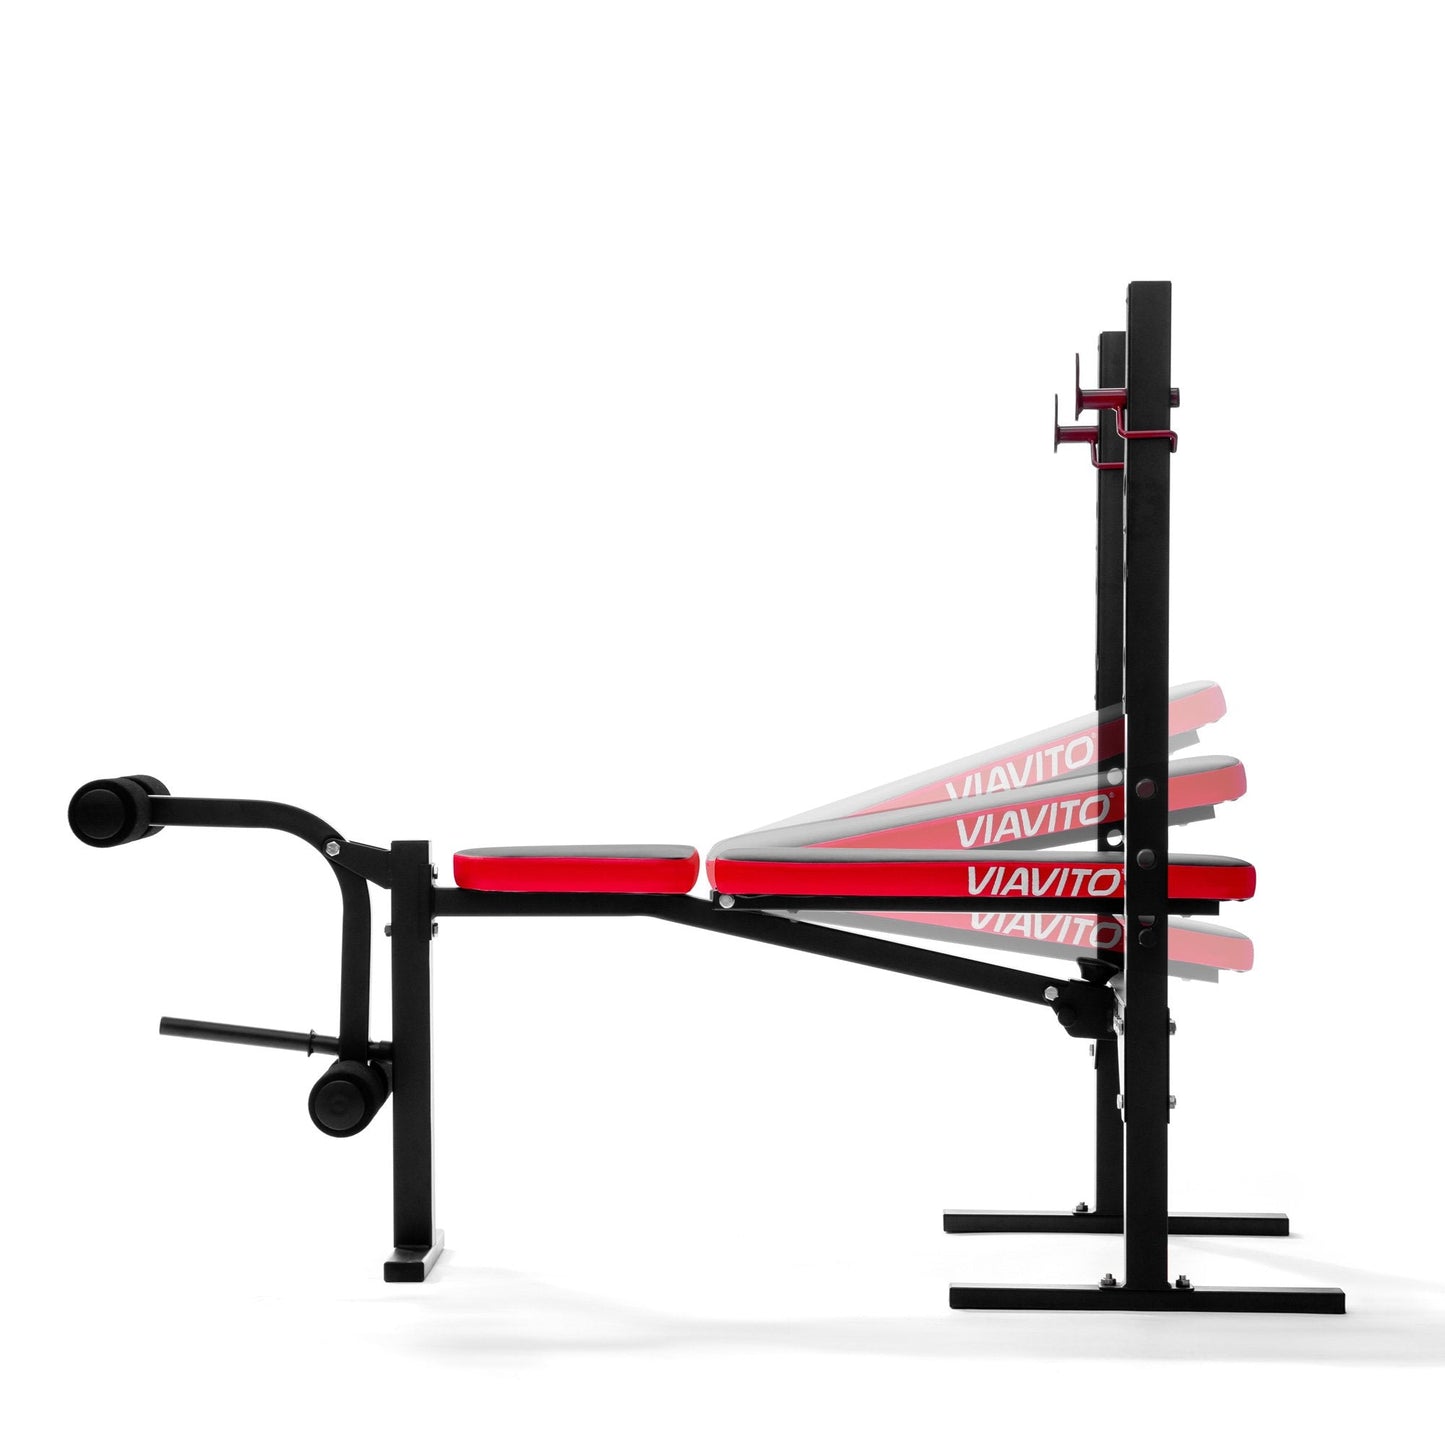 |Viavito SX200 Folding Barbell Weight Bench - Levels|